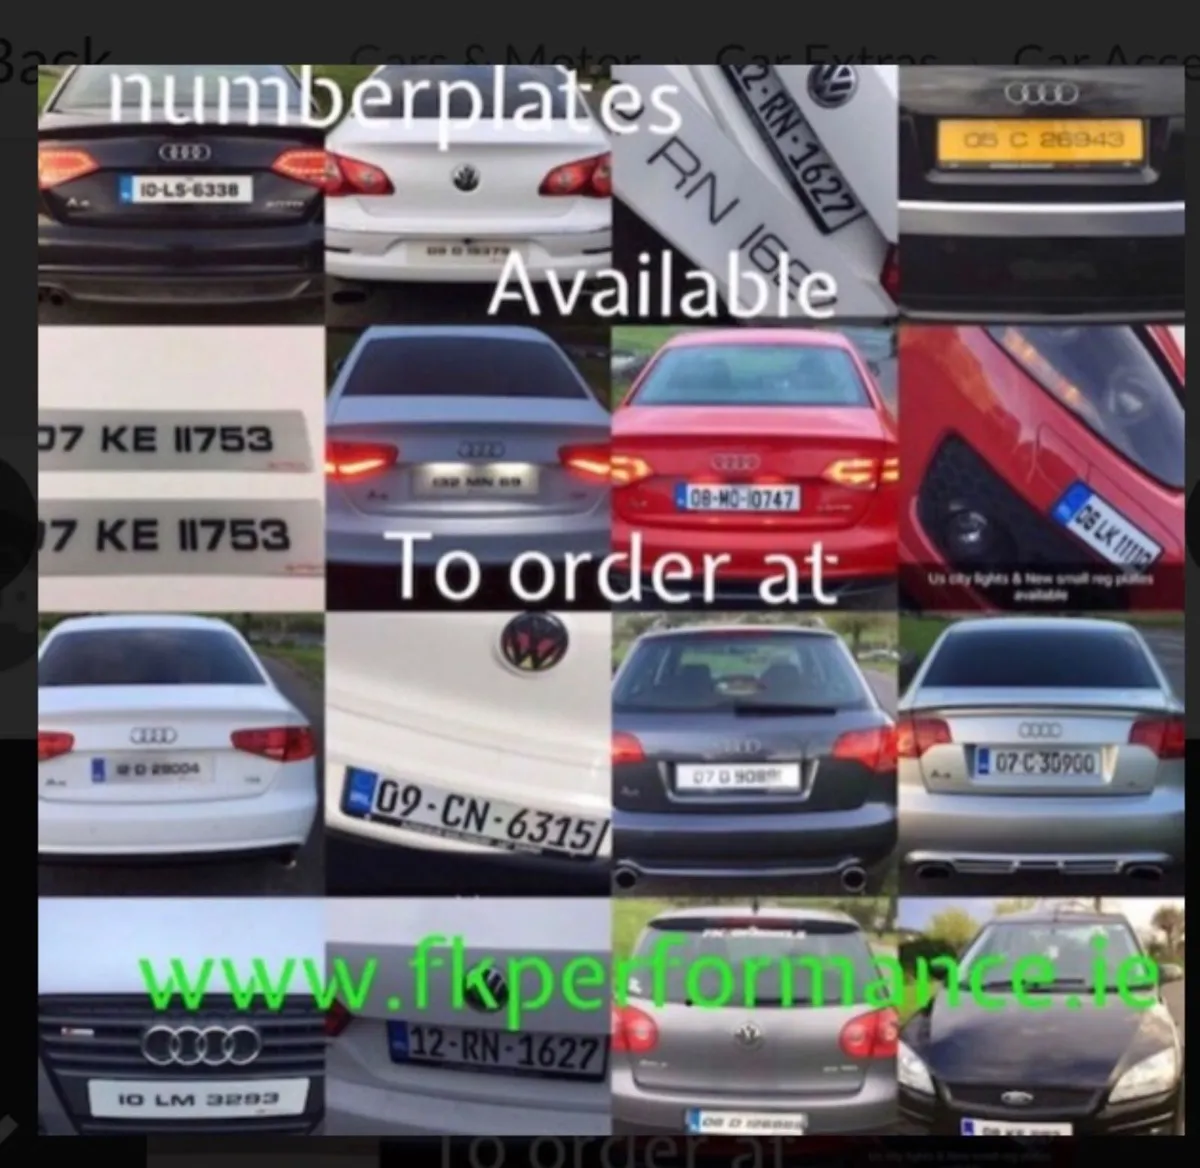 Nct & upgrade number plates from €25